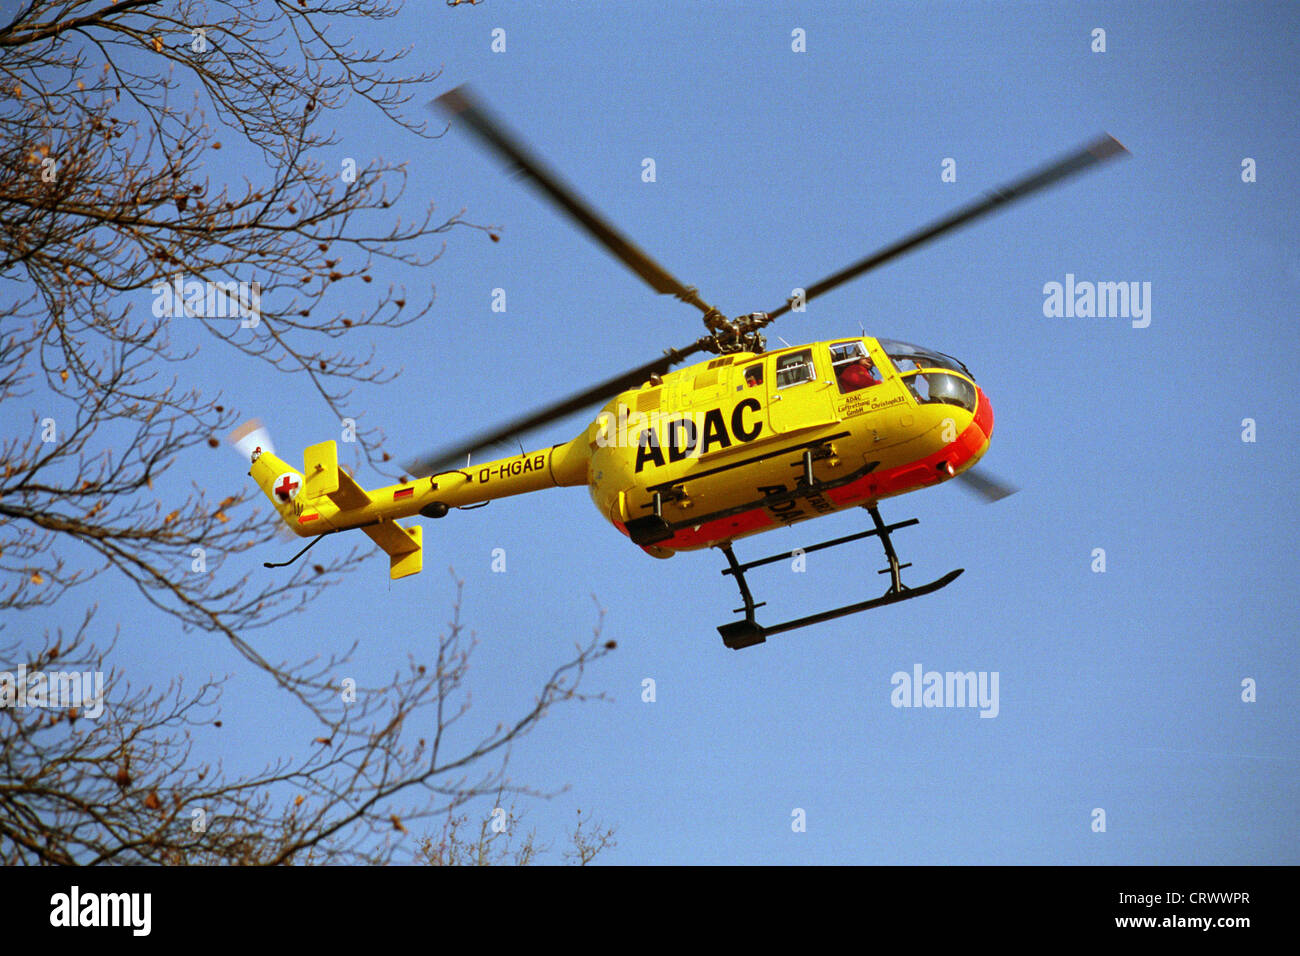 The ADAC helicopter in action Stock Photo